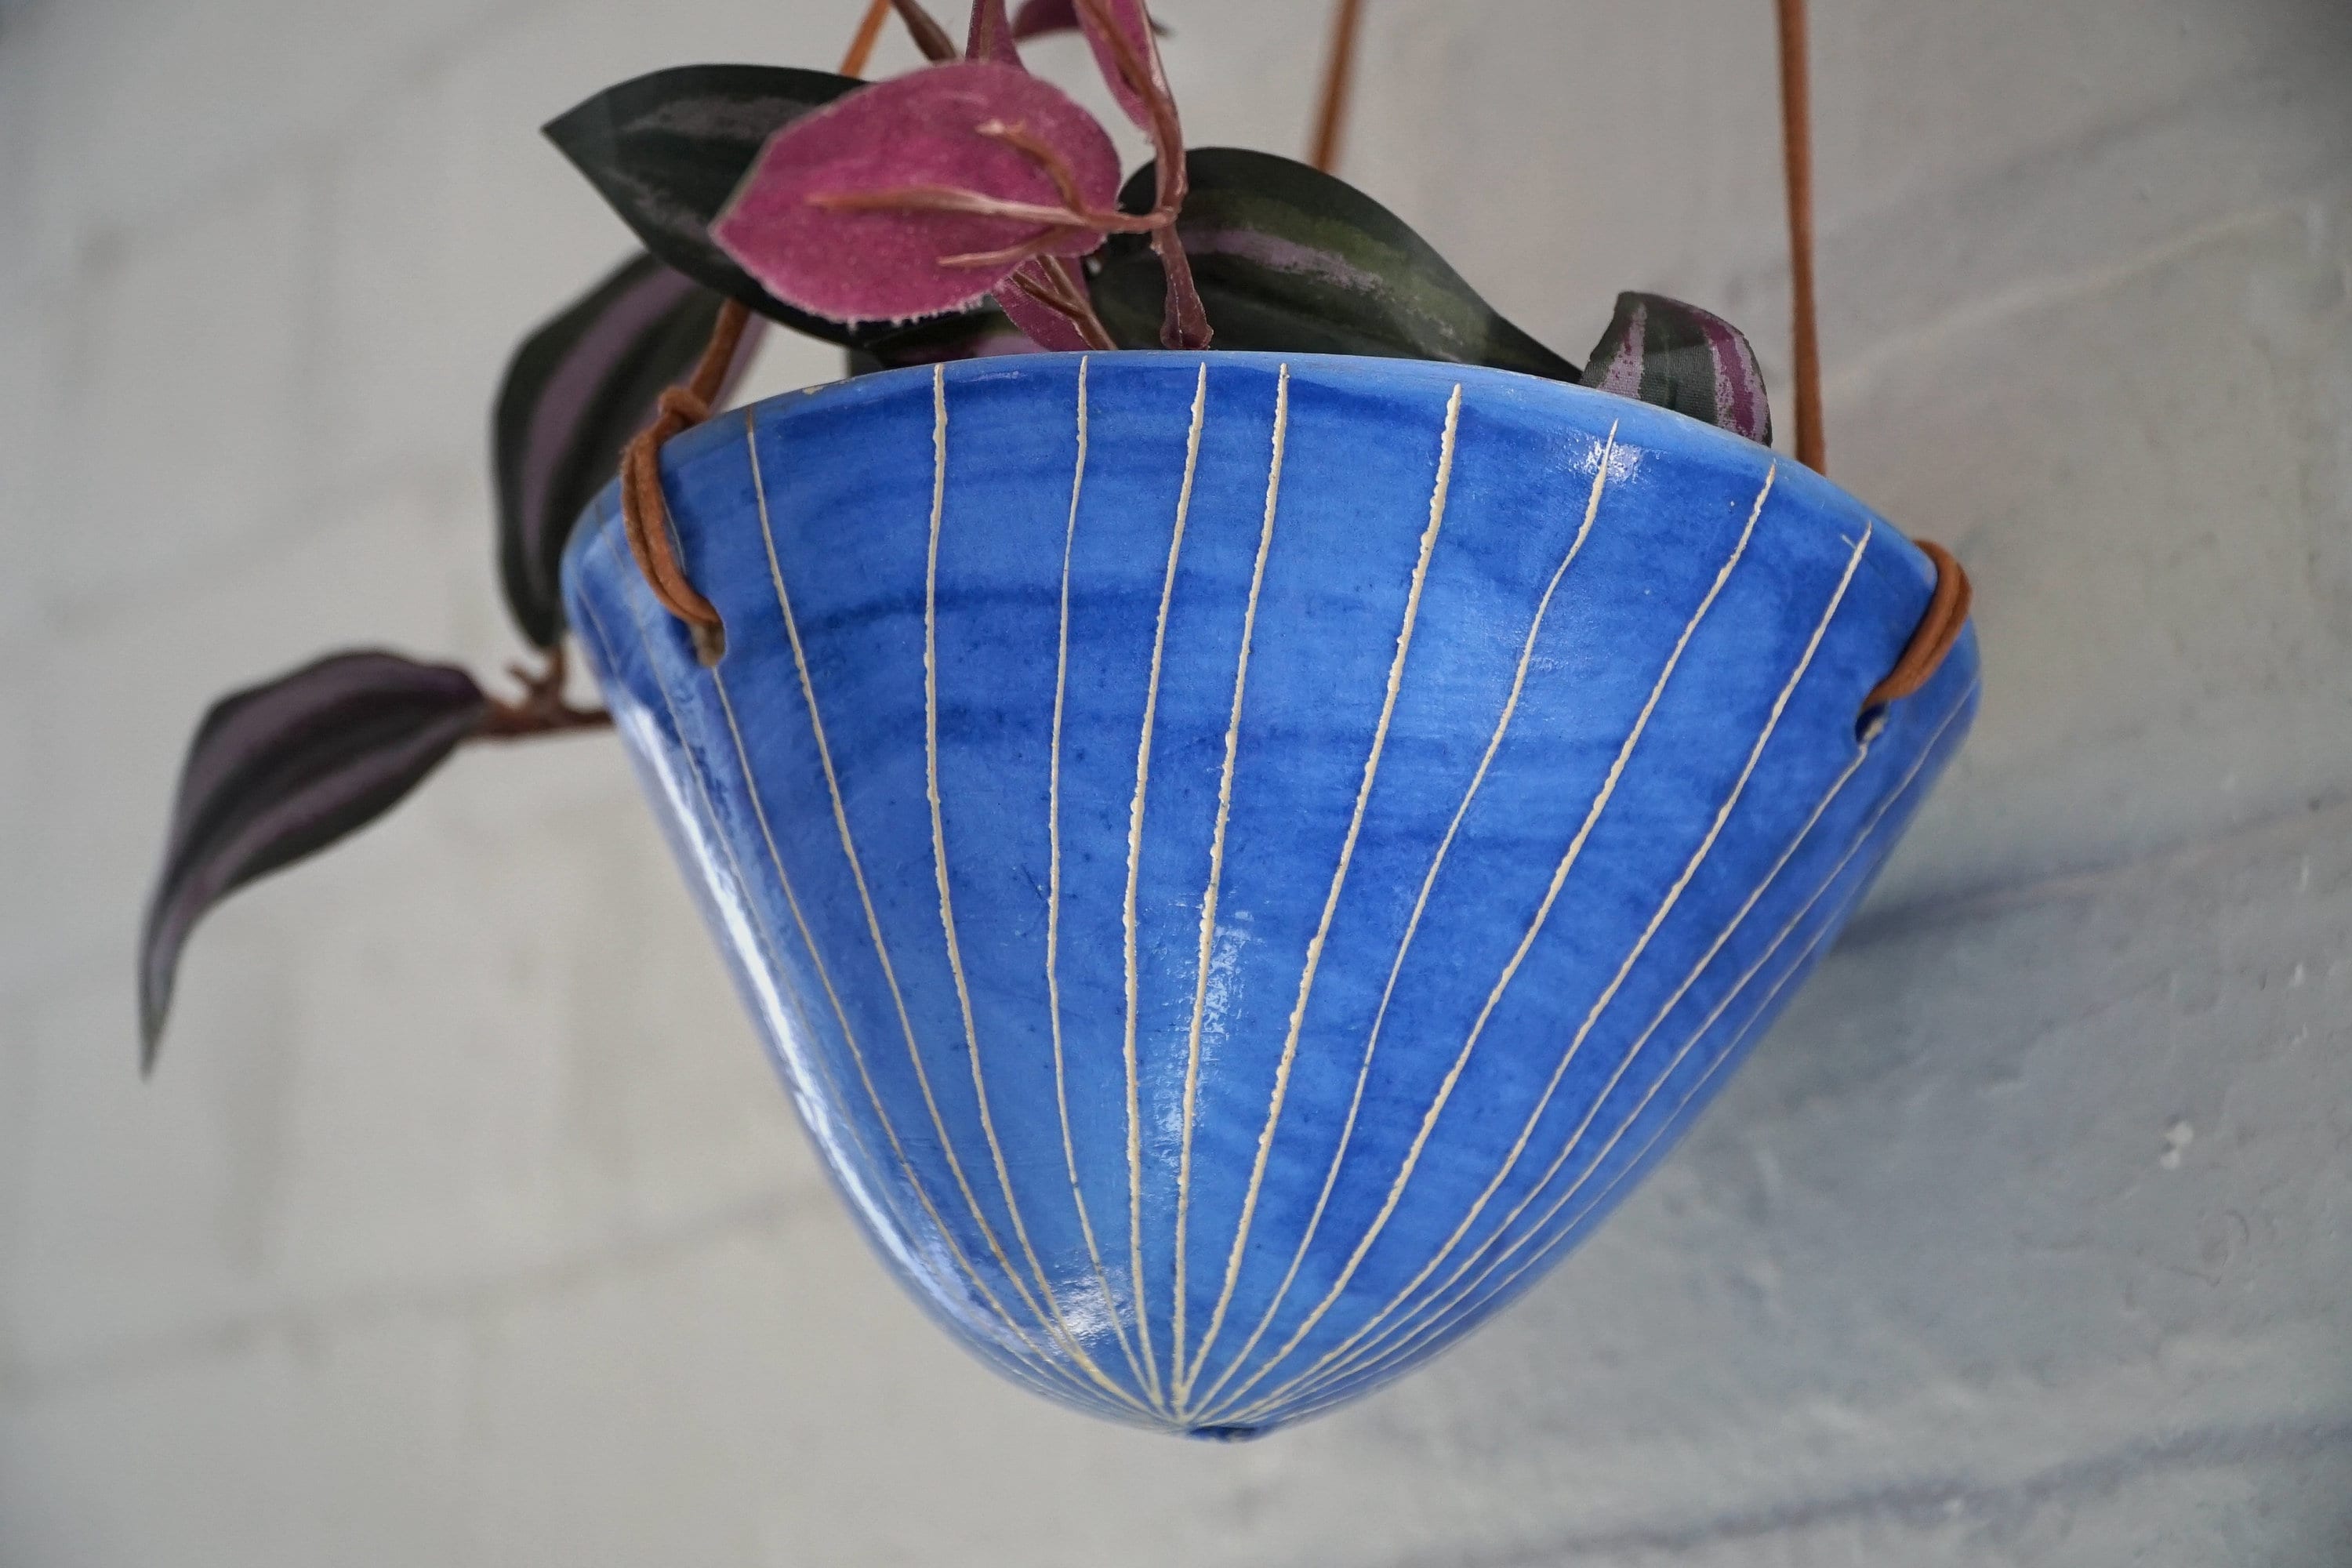 Blue & White Glazed Hanging Planter w/ "Vertical Line" Design - Pot with Carved Design - Propagating - Succulent, Cactus, Herb, Air Plant